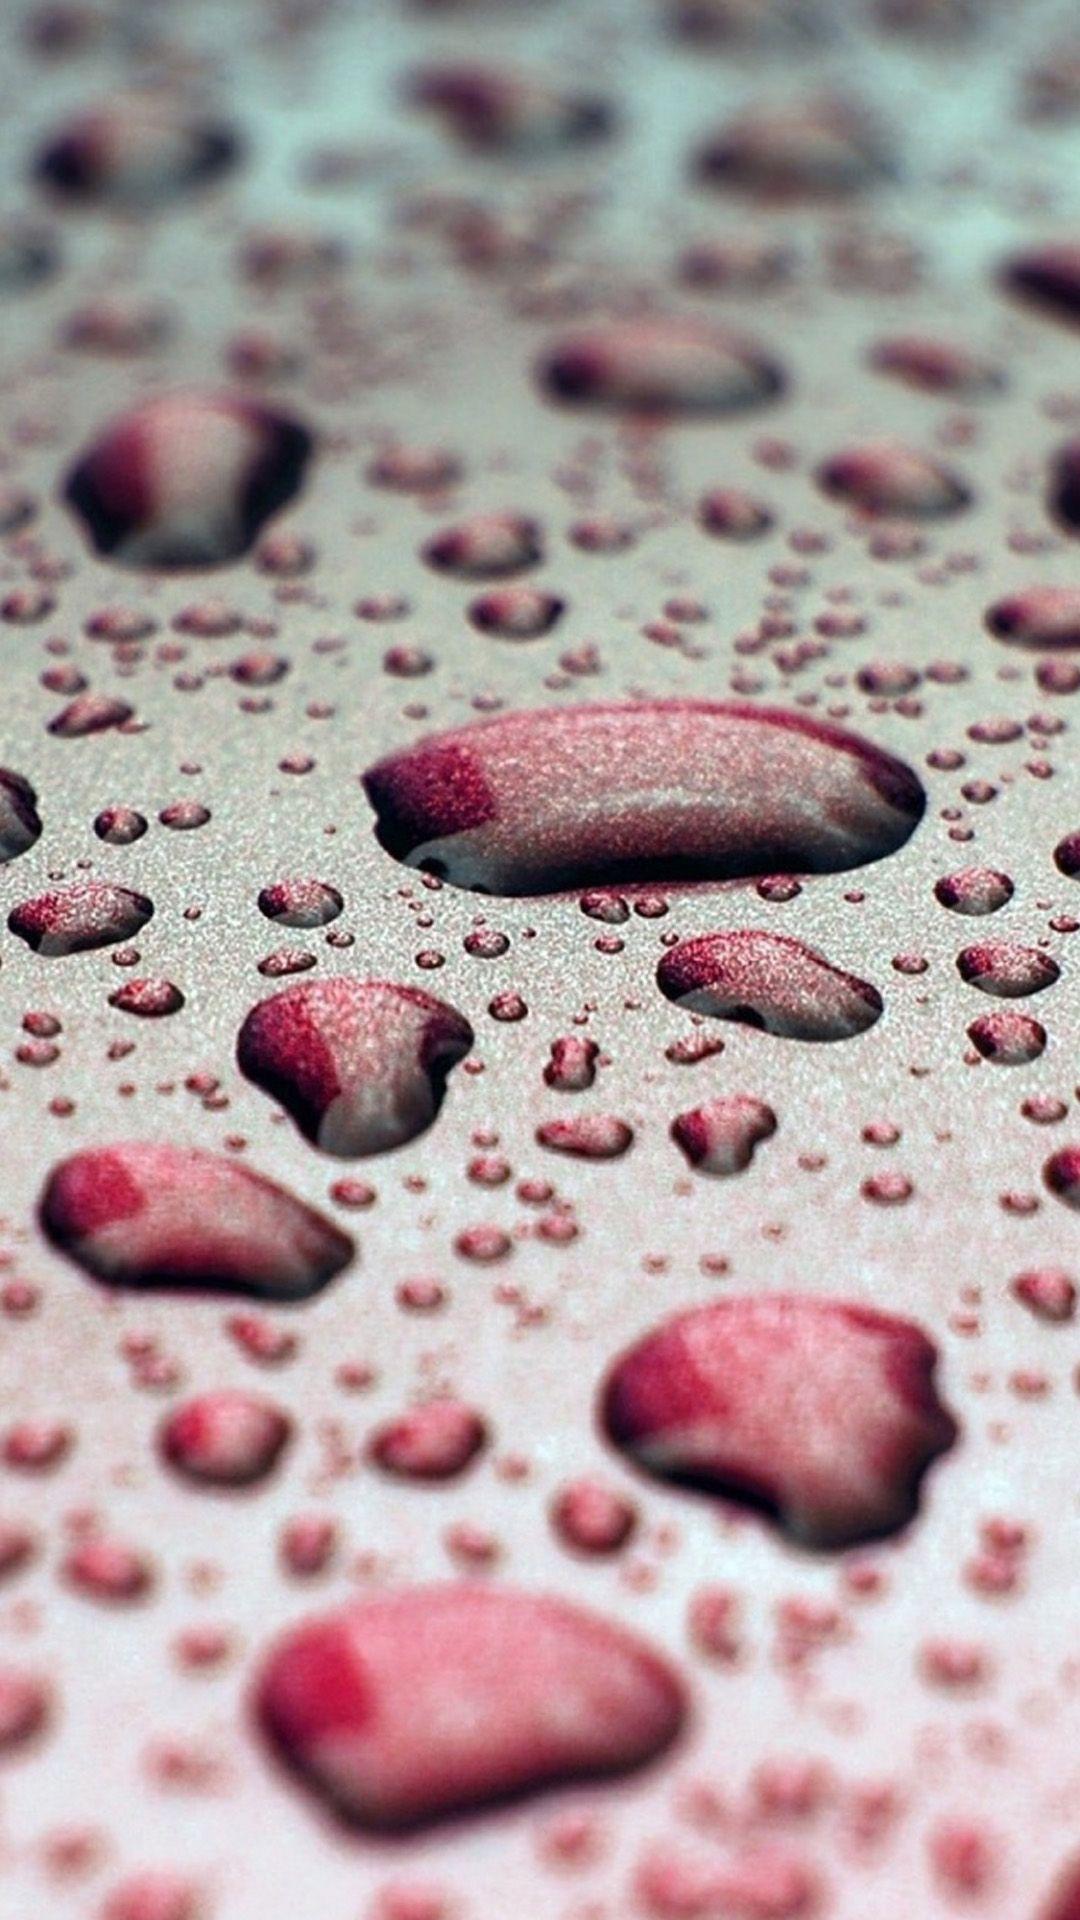 Red water drop 2 Galaxy Note 3 Wallpaper